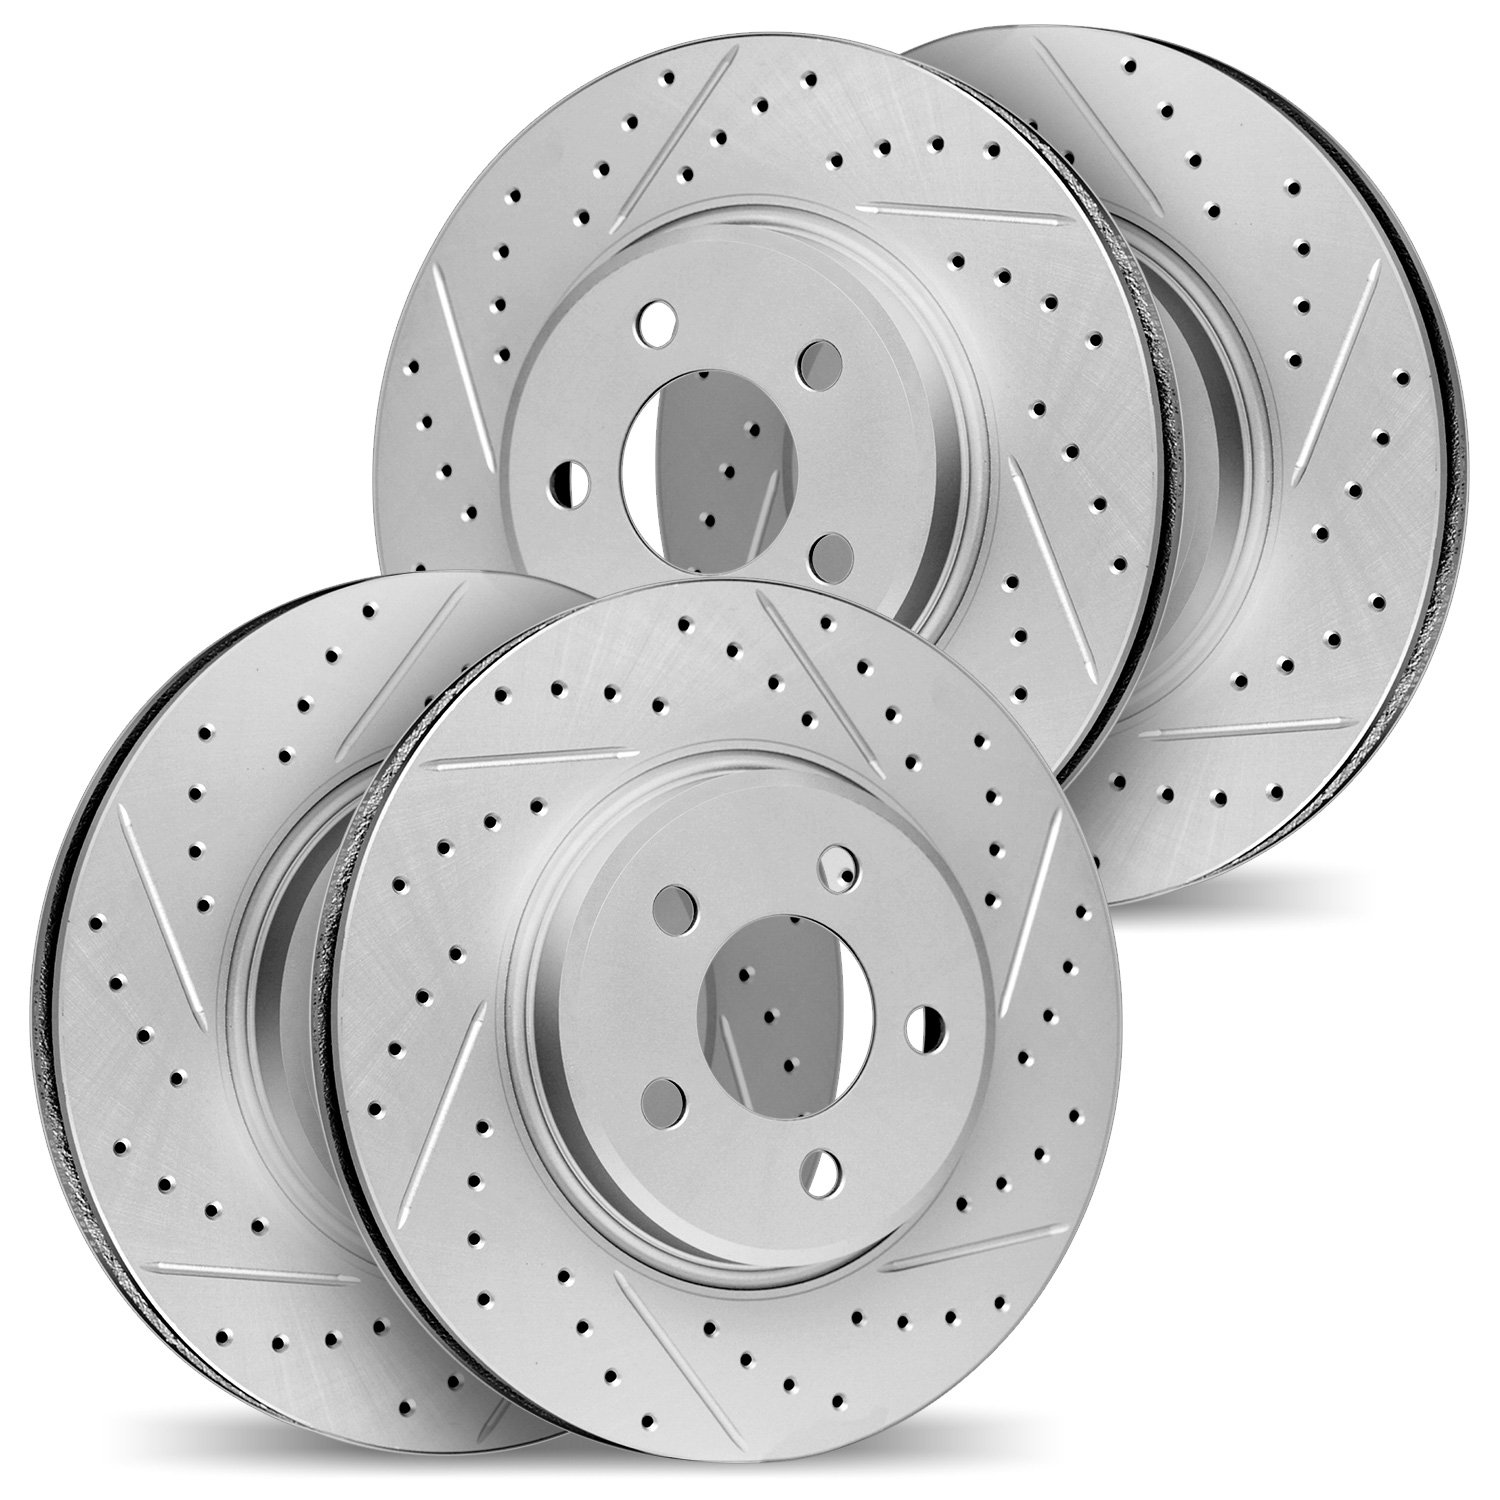 2004-03024 Geoperformance Drilled/Slotted Brake Rotors, 2011-2011 Kia/Hyundai/Genesis, Position: Front and Rear